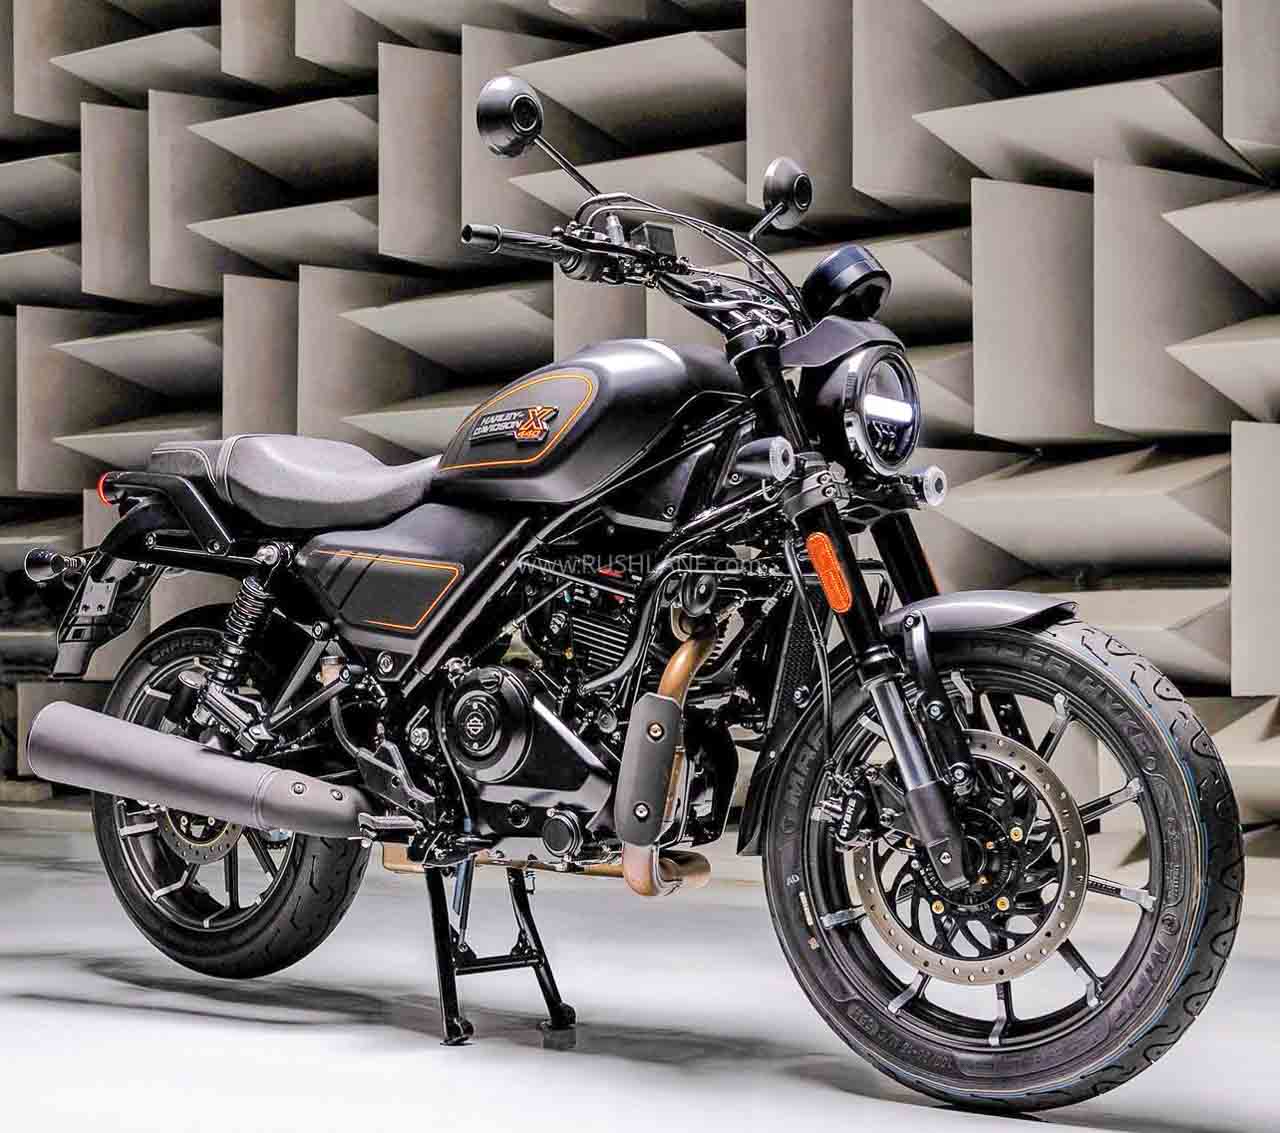 New Harley Davidson X440 Debuts - Made in India by Hero MotoCorp